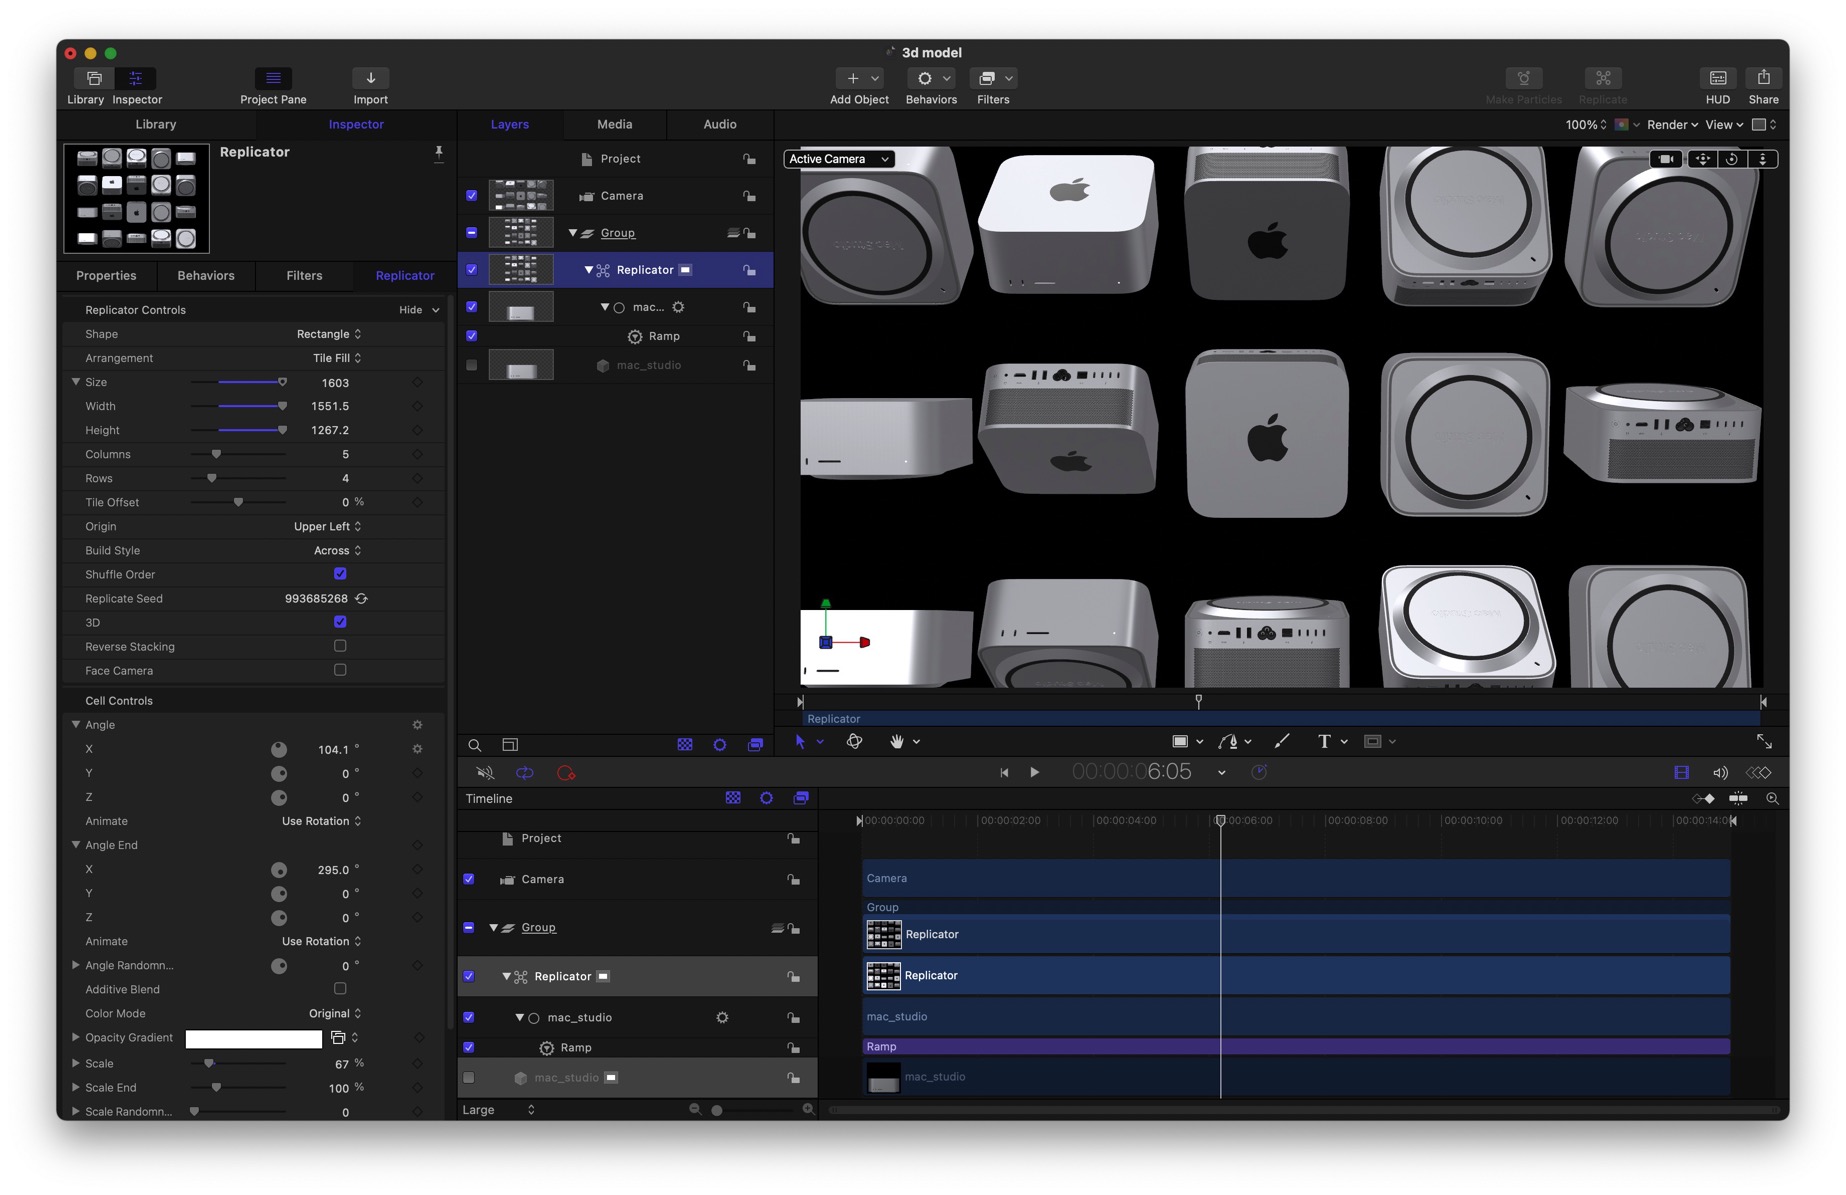 Apple Motion — every editor’s secret weapon 18